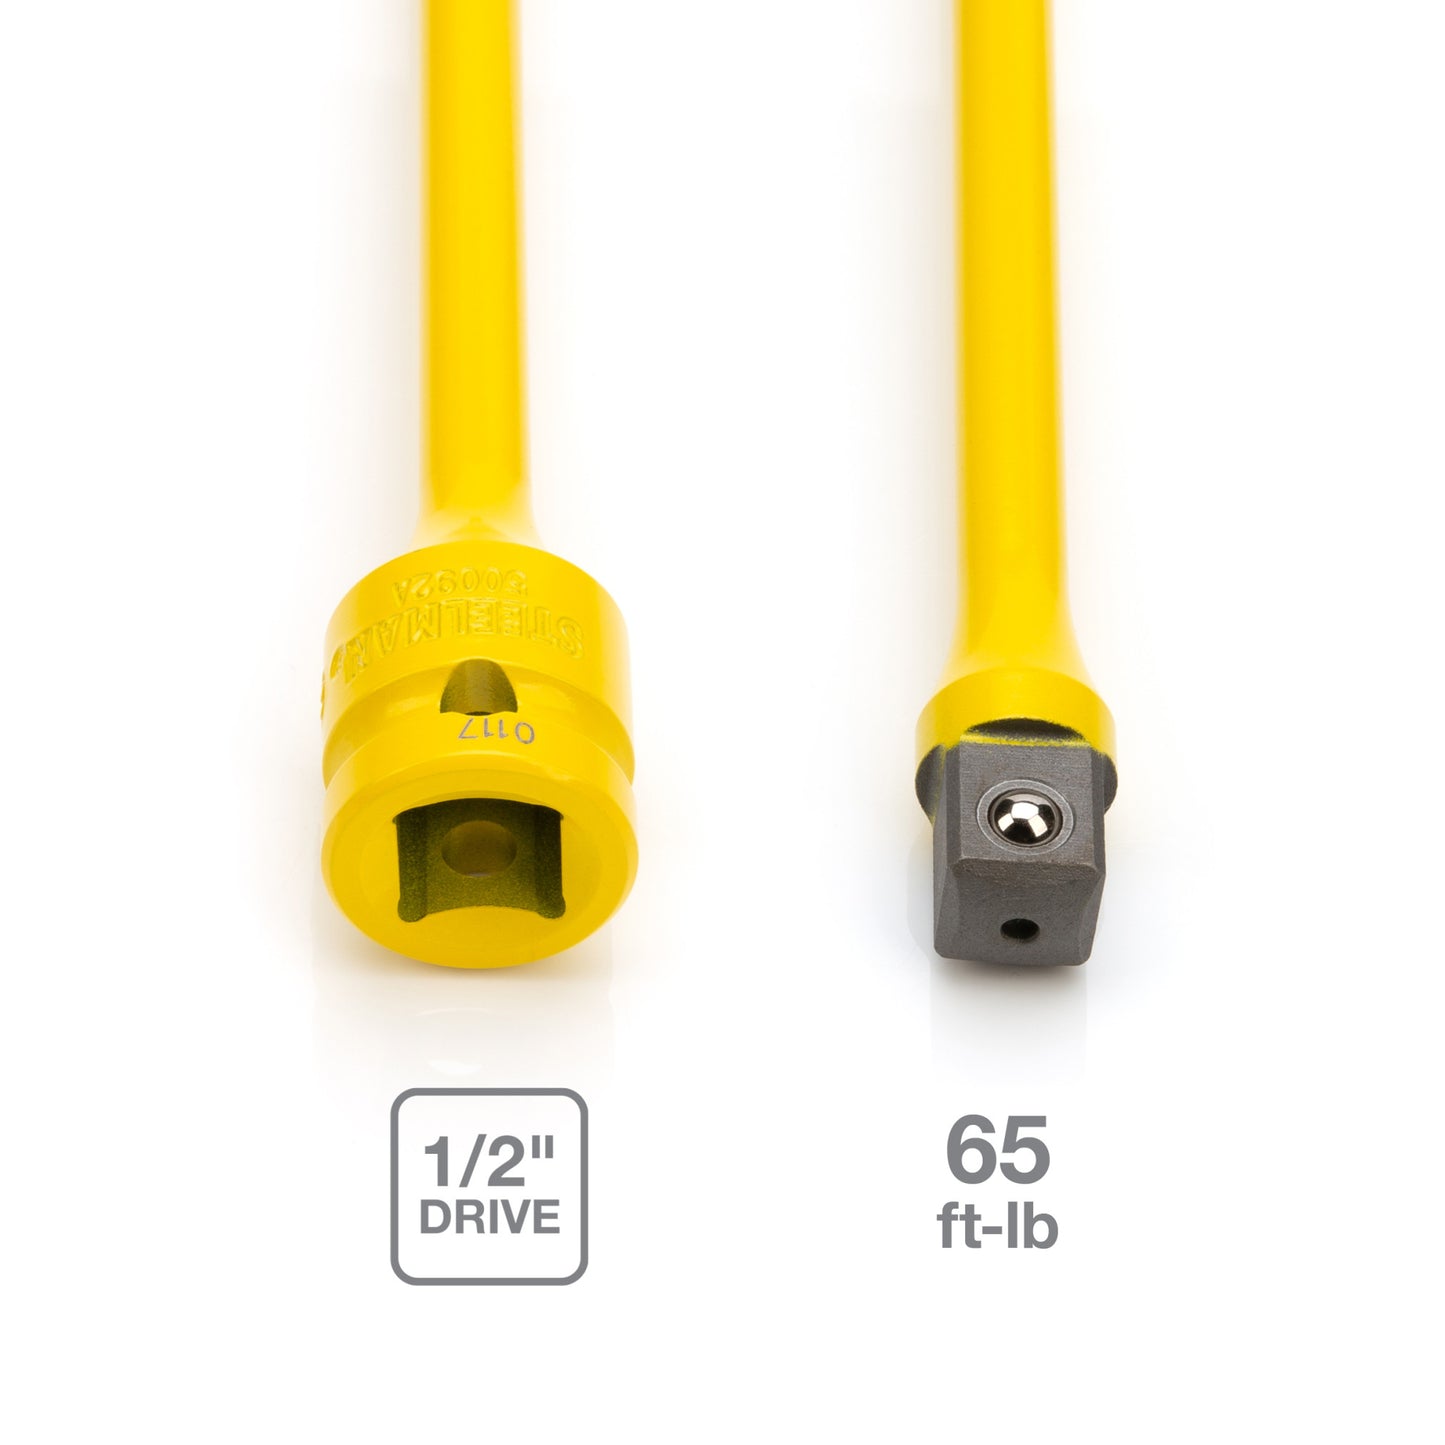 1/2-inch Drive 65 ft-lb Torque Extension - Yellow